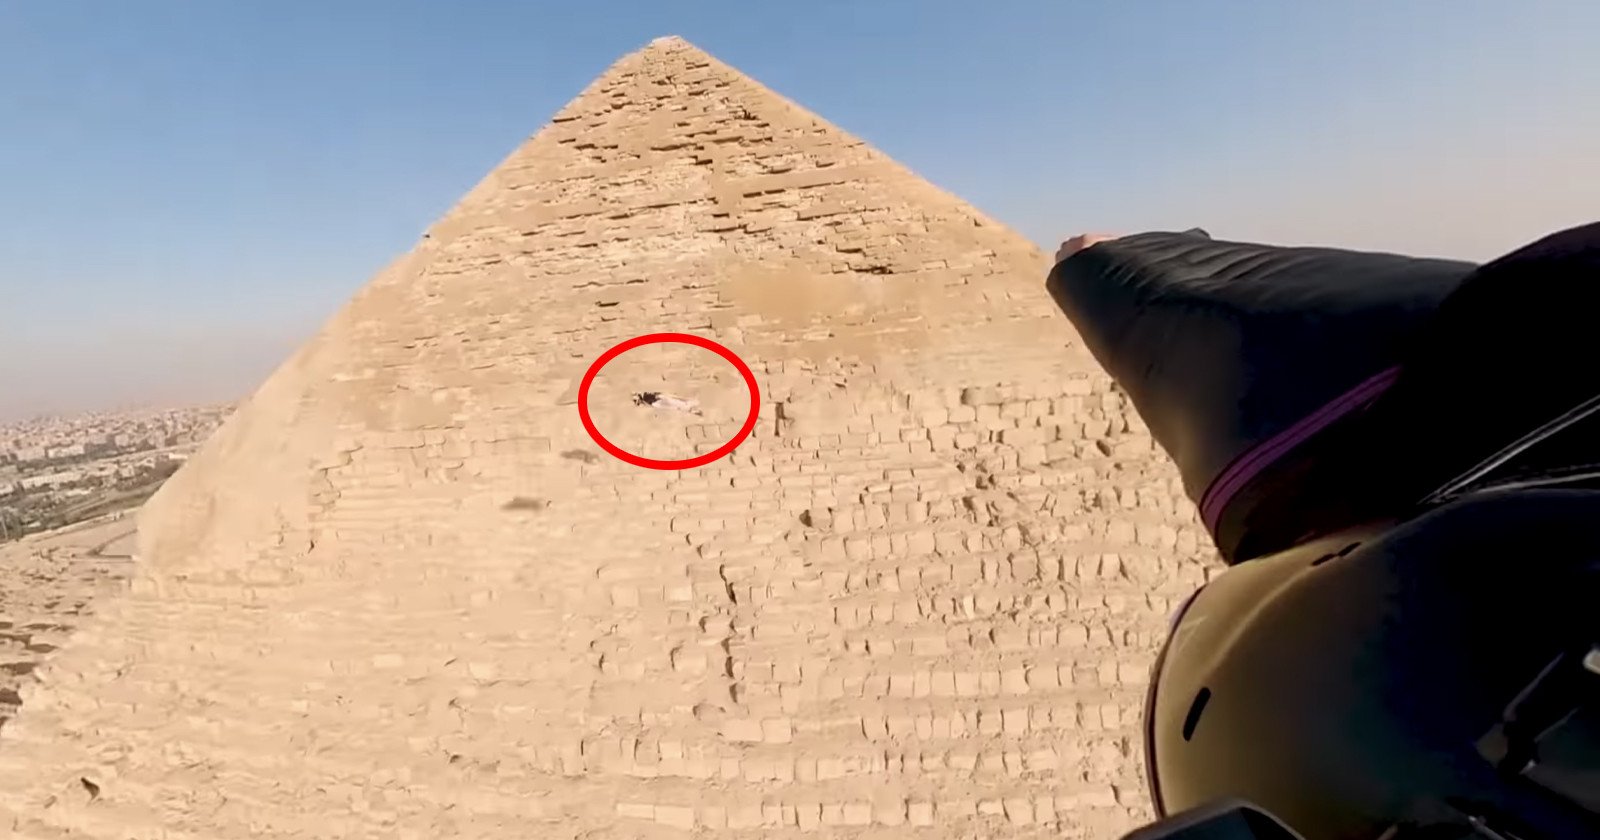 Insane Footage Shows Wingsuit Flight Up Close to Egyptian Pyramids